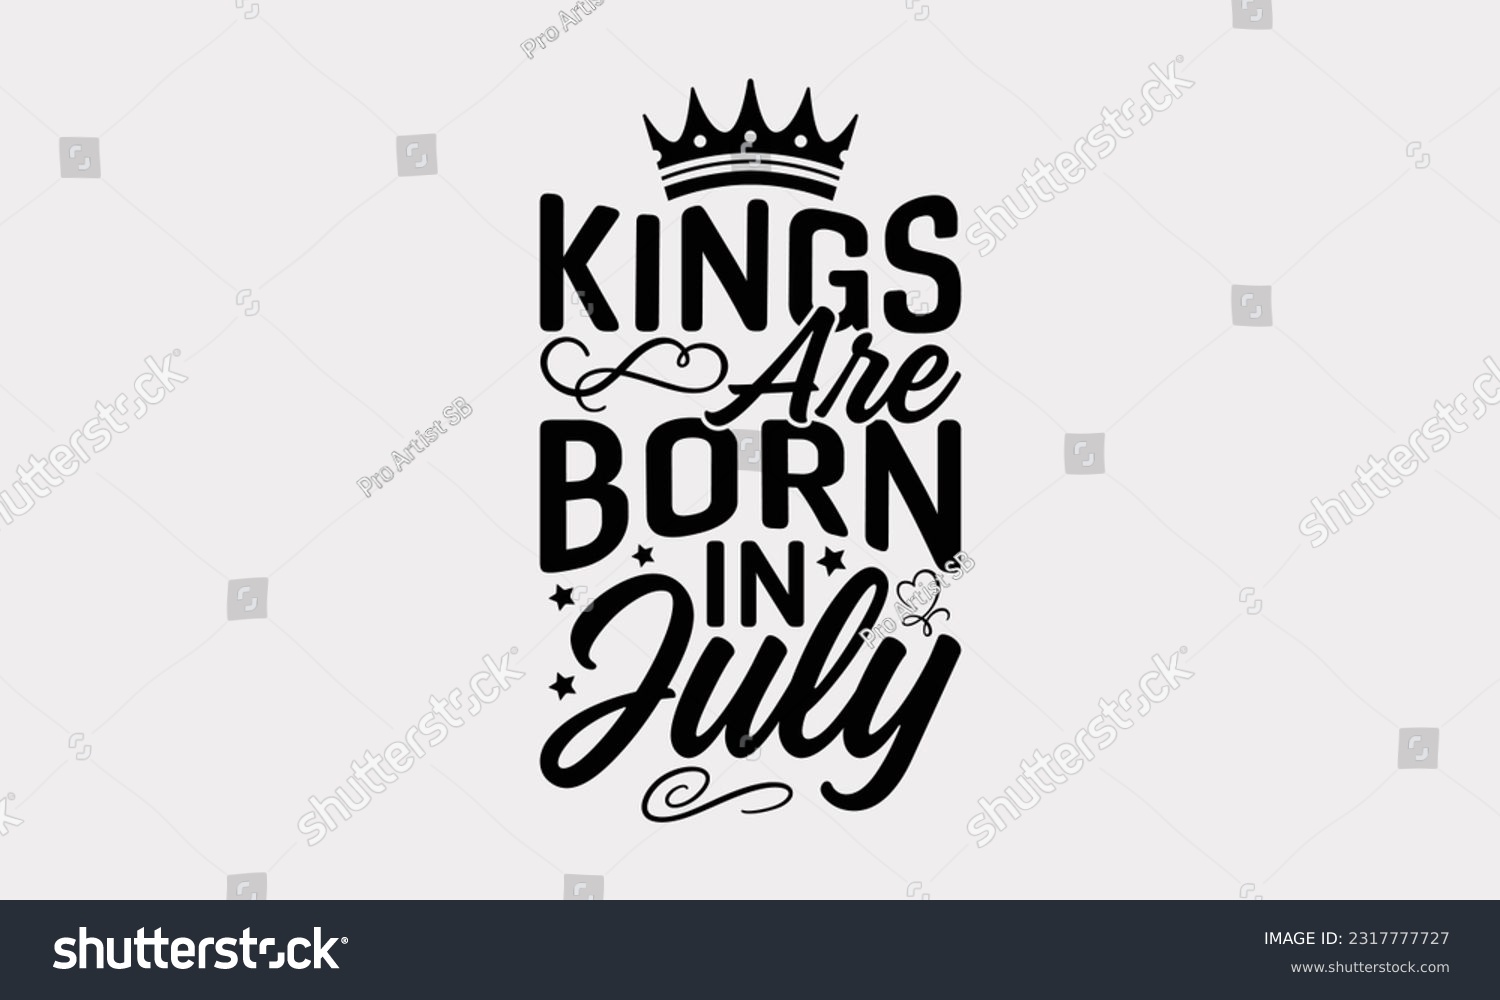 SVG of Kings Are Born In July - Birthday Month T-Shirt Design, Motivational Inspirational SVG Quotes, Hand Drawn Vintage Illustration With Hand-Lettering And Decoration Elements. svg